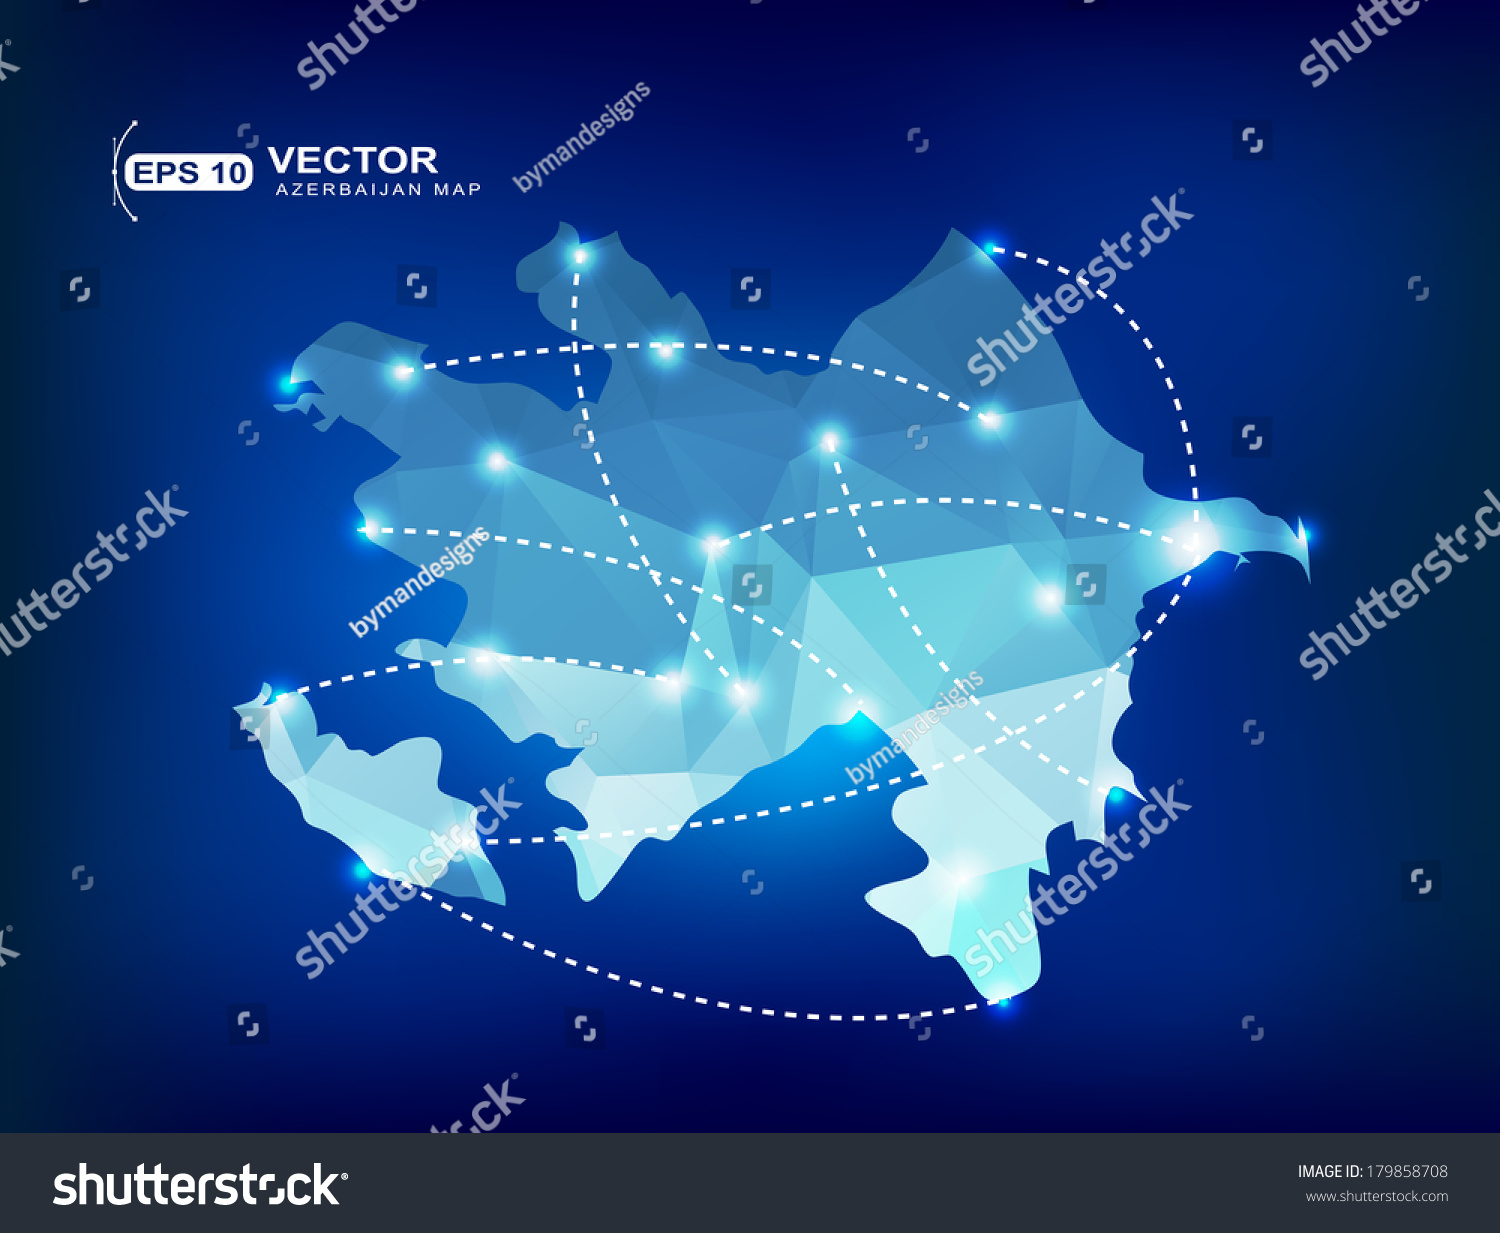 SVG of Azerbaijan country map polygonal with spot lights places svg